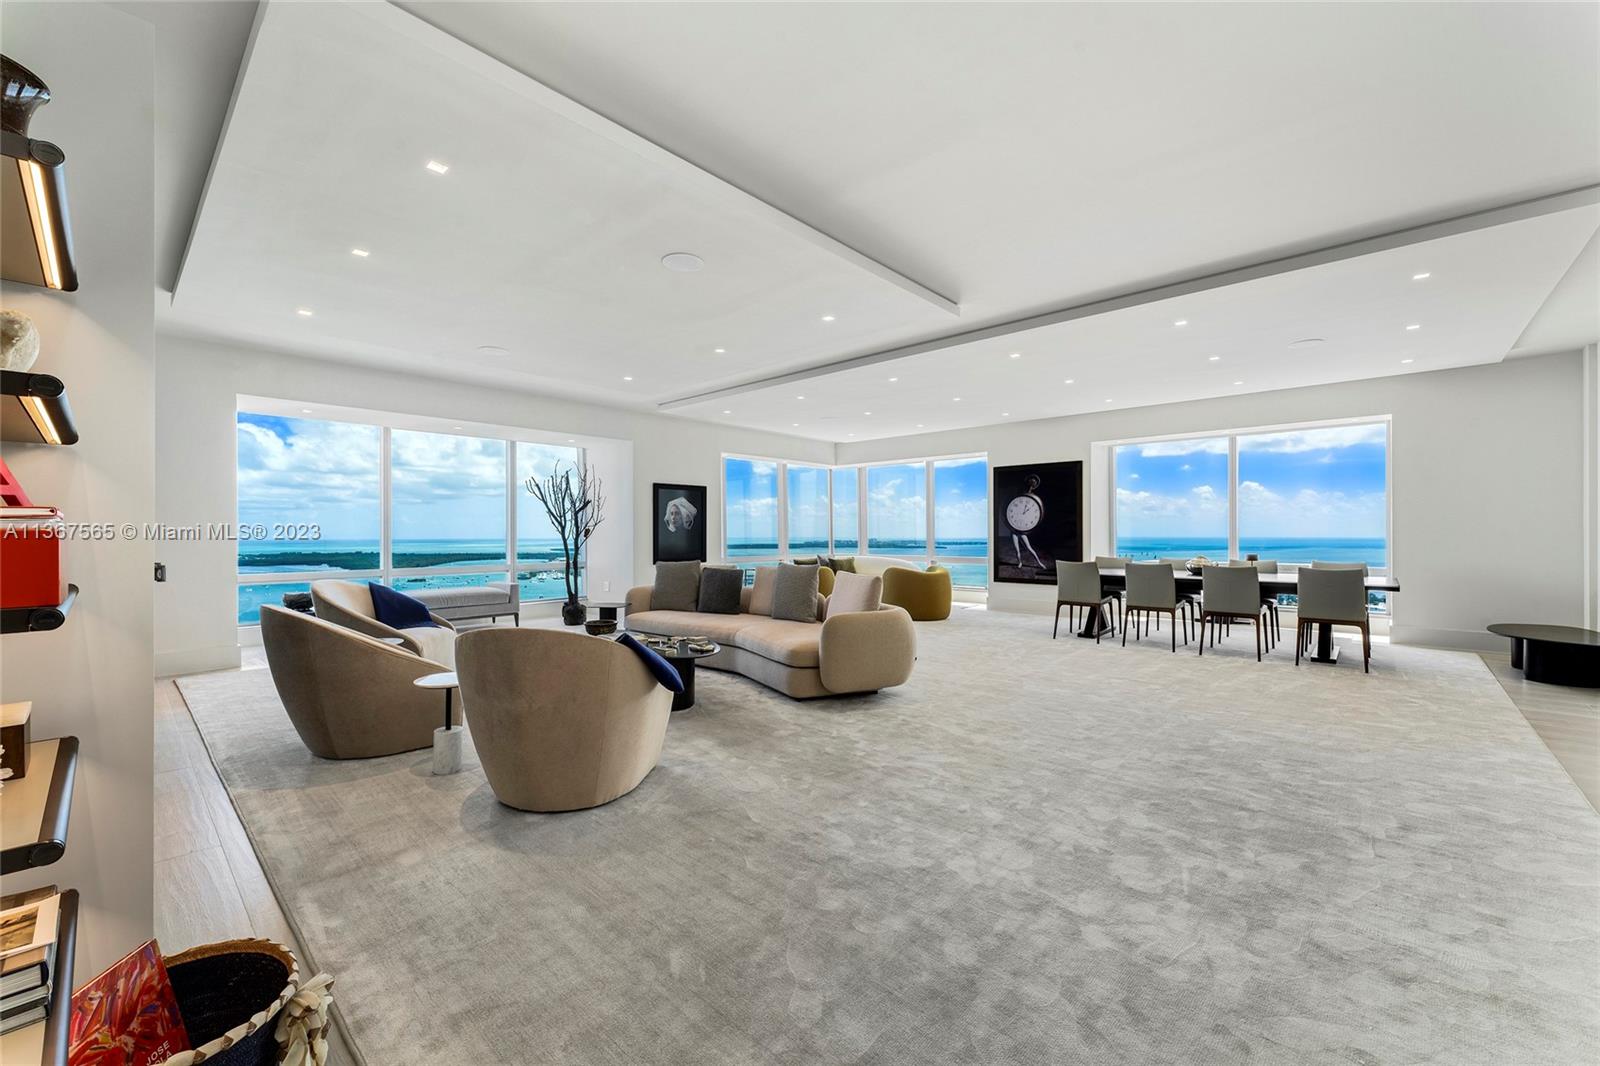 This spectacular newly renovated contemporary corner unit at the exclusive Four Seasons Miami offers 3BR/4+1BA &amp; 3,913 SF of beautifully proportioned interiors w/amazing unobstructed views far as the eye can see over Biscayne Bay, Miami Beach, Atlantic Ocean, Key Biscayne and city. Custom wall papers, millwork, cabinetry, porcelain oak tile floors, designer treatments. Spacious living &amp; dining floor plan surrounded by glass walls w/water views from every angle. Chef’s kitchen w/top-of the-line appliances, Stosa cabinetry, Opustone center island &amp; access to a terrace. Private principal suite offers custom walk-in closet, private terrace &amp; stunning bathroom w/exquisite marble &amp; sunken tub. The other two BRs are each meticulously designed w/en-suite baths. 5-star Four Seasons amenities.